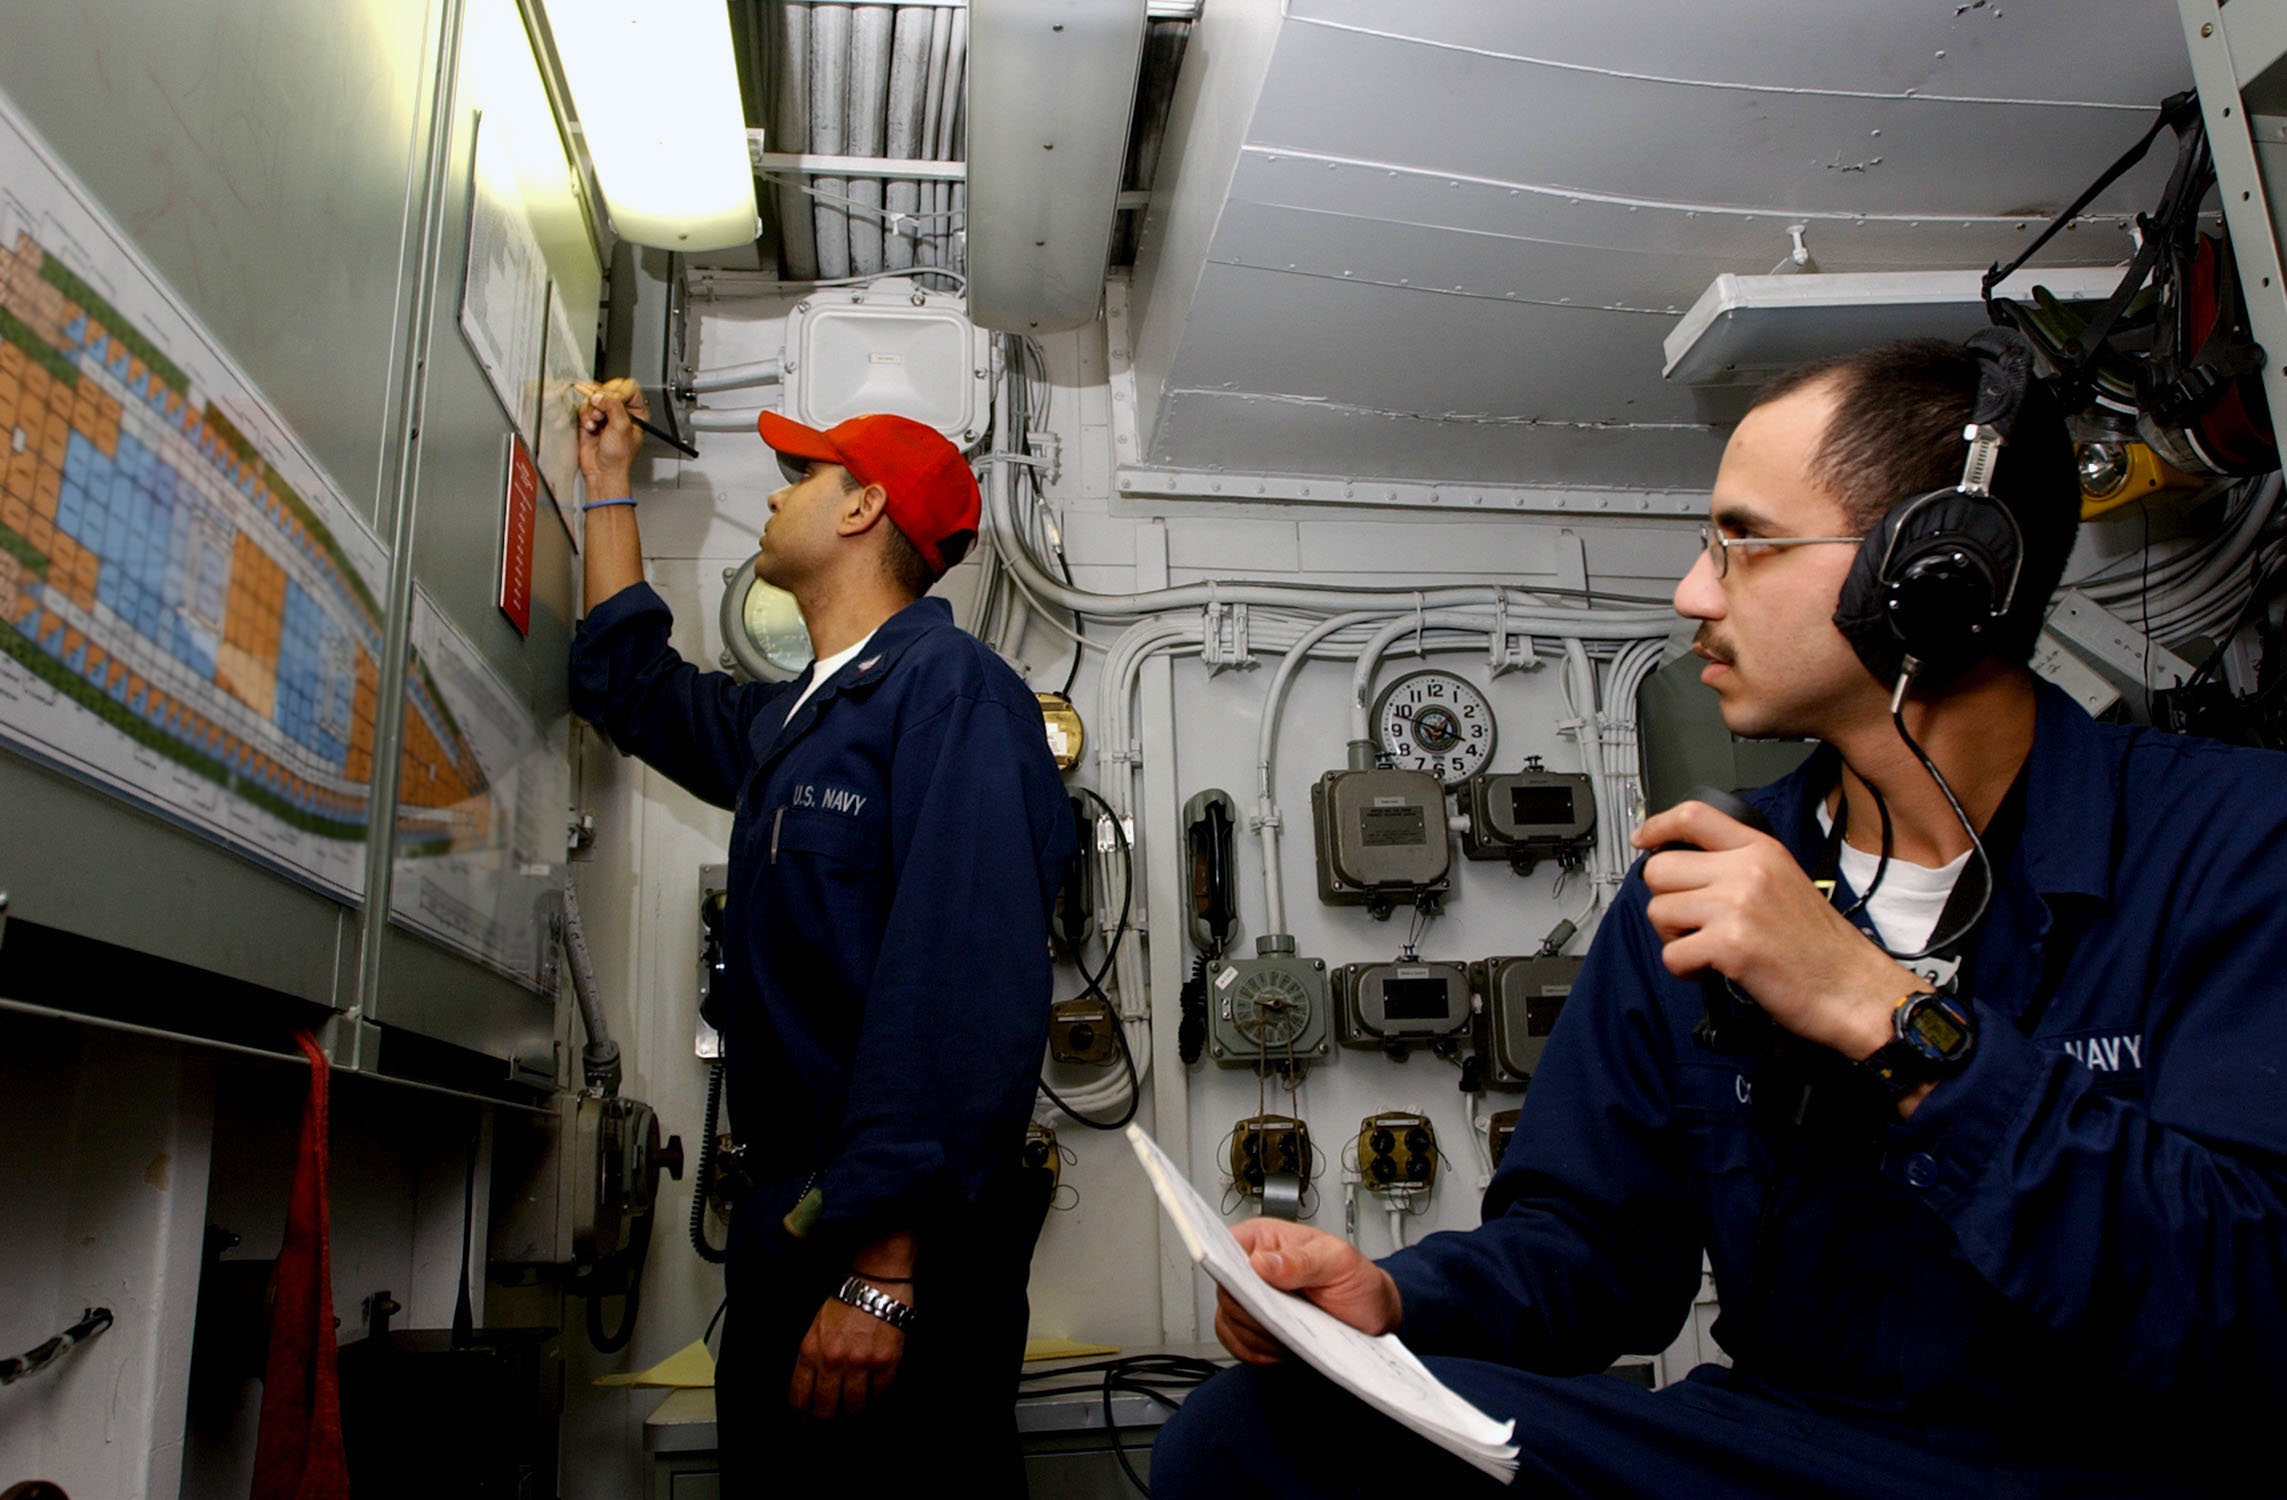 US Navy 030407-N-4953E-099 Fireman William Castro performs duties as Repair Locker Phone talker, reporting casualty information to Damage Controlman 3rd Class Omar Ortega, during a simulated fire drill aboard USS Harry S. Truma.jpg